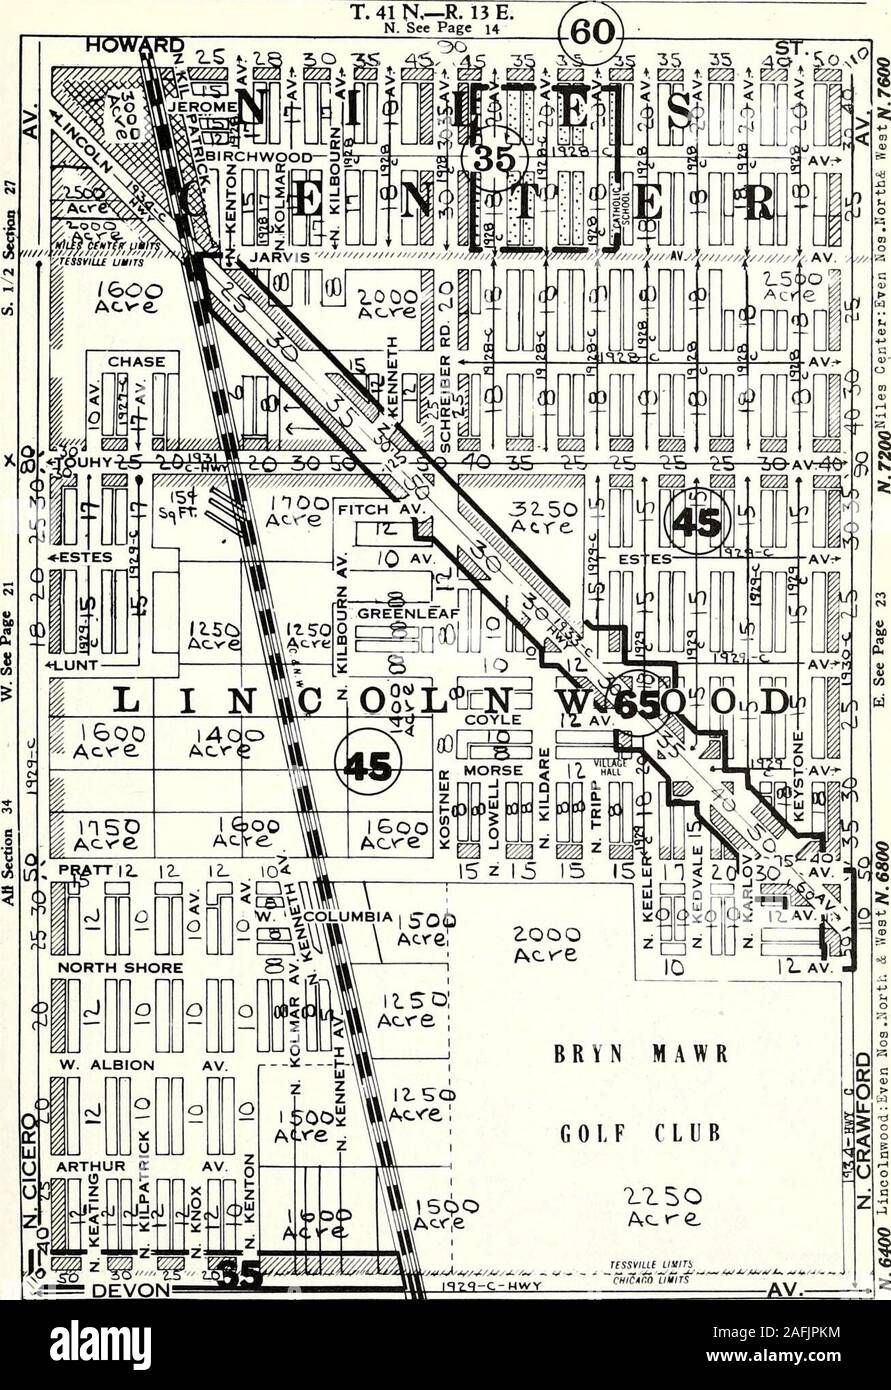 . Olcott's land values blue book of Chicago. W.S600 S.VJ Sec 28 All Vac-Hew Subs-Not Pavedmi Sec 33 All Vac-New Subs-Kot PavedSW| Sec 33 Cla&s 4-6-9-15-Vac Lota W.4SO0 SEi Sec 28 All Va?-Hew Subs HE? Sec 33 All Vac-Hew Suba-Hot Paved SE| Sec 33 Class 4-15-Vao I,ot8 OLCOTTS LAND VALUES & ZONING 1936 TR5W T. 41 N.—R. 13 E. N. See Page u. DEVON { W.4800 SW^ Sec 27 All Vac-Hew Suba Mi Sec 34 All Vac-New SwJSeo 34 All Vac-New Sub-Not Paved S. See Page 31 W.^tOOO 3Ei Sec 27 All Vao-lTeH SubaNEi Sec 34 All Vac-New SubaSEt Sec 34 All Vao-Golf Club m- OLCOTTS LAND VALUES & ZONING 1936 T. 41 N.—R, 13 E. Stock Photo